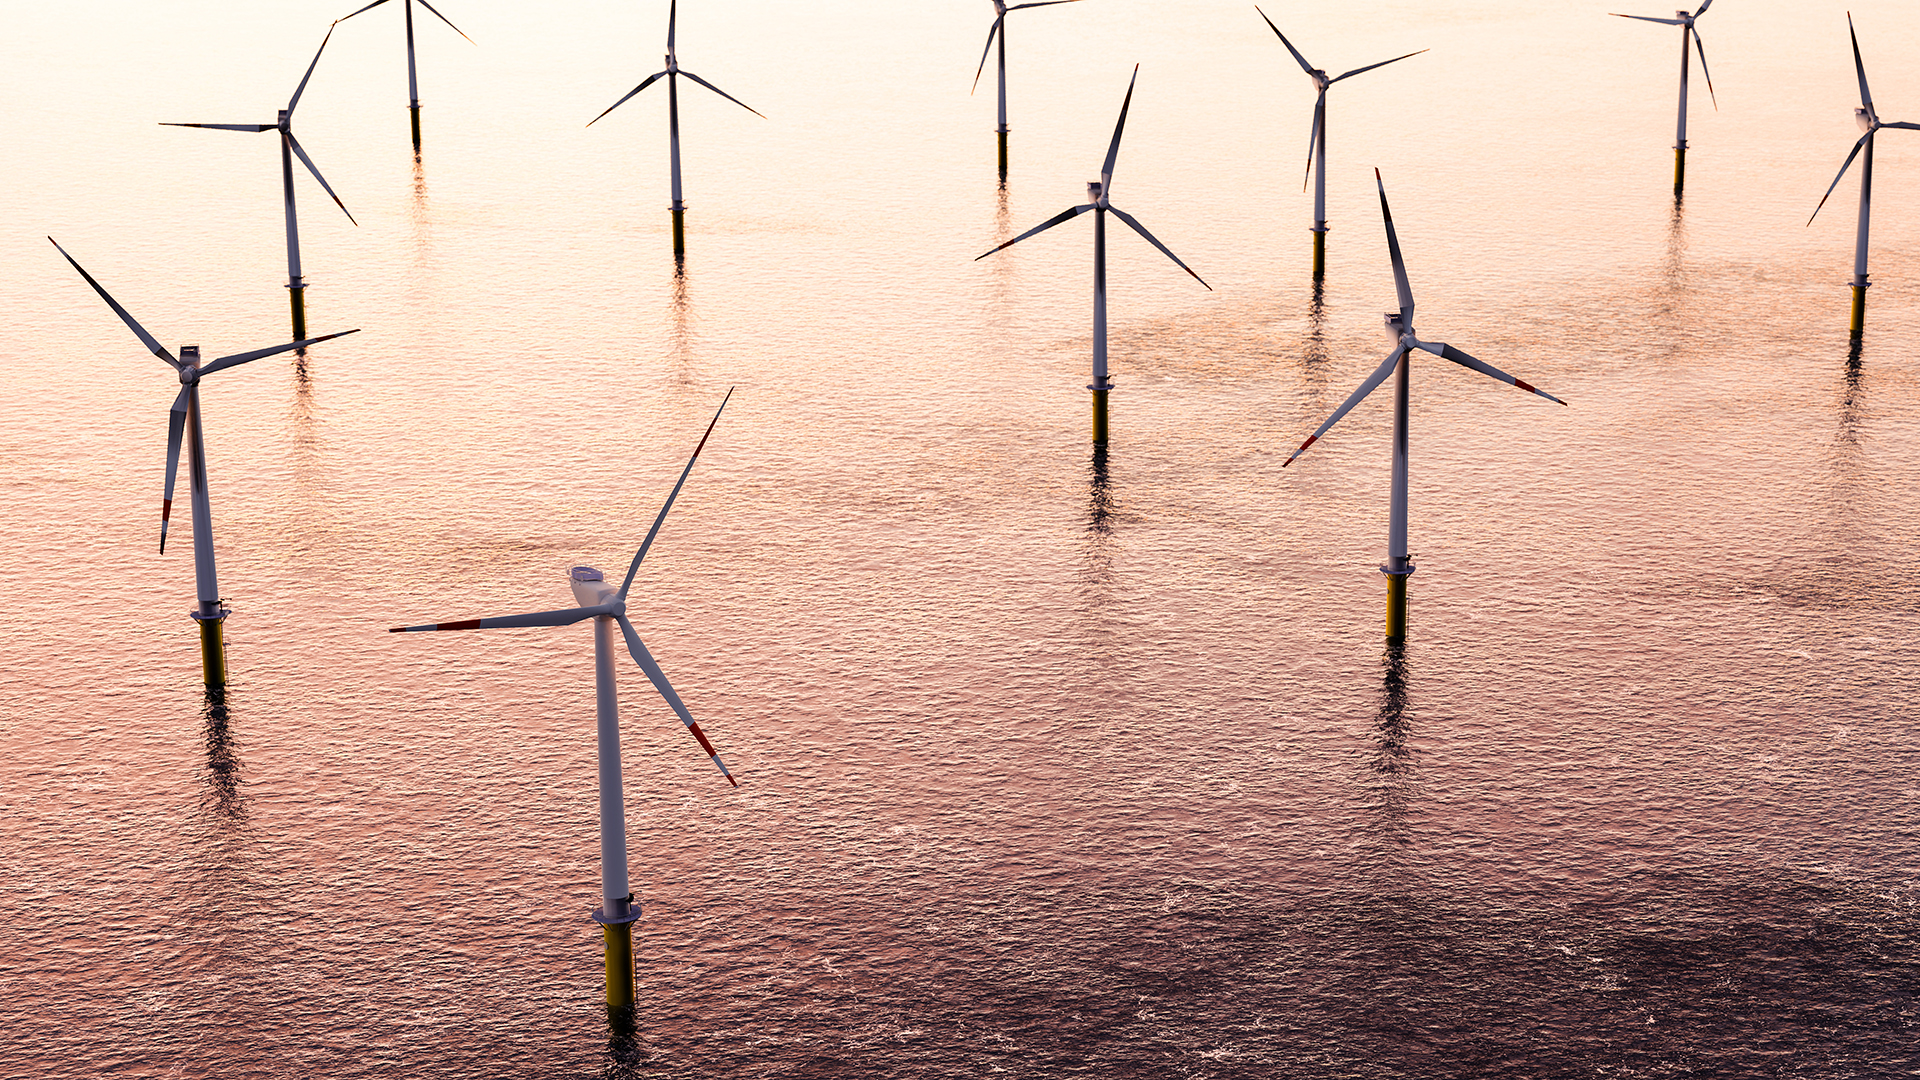 Offshore Wind Turbine Farm for Sustainable Energy Production & Clean Power